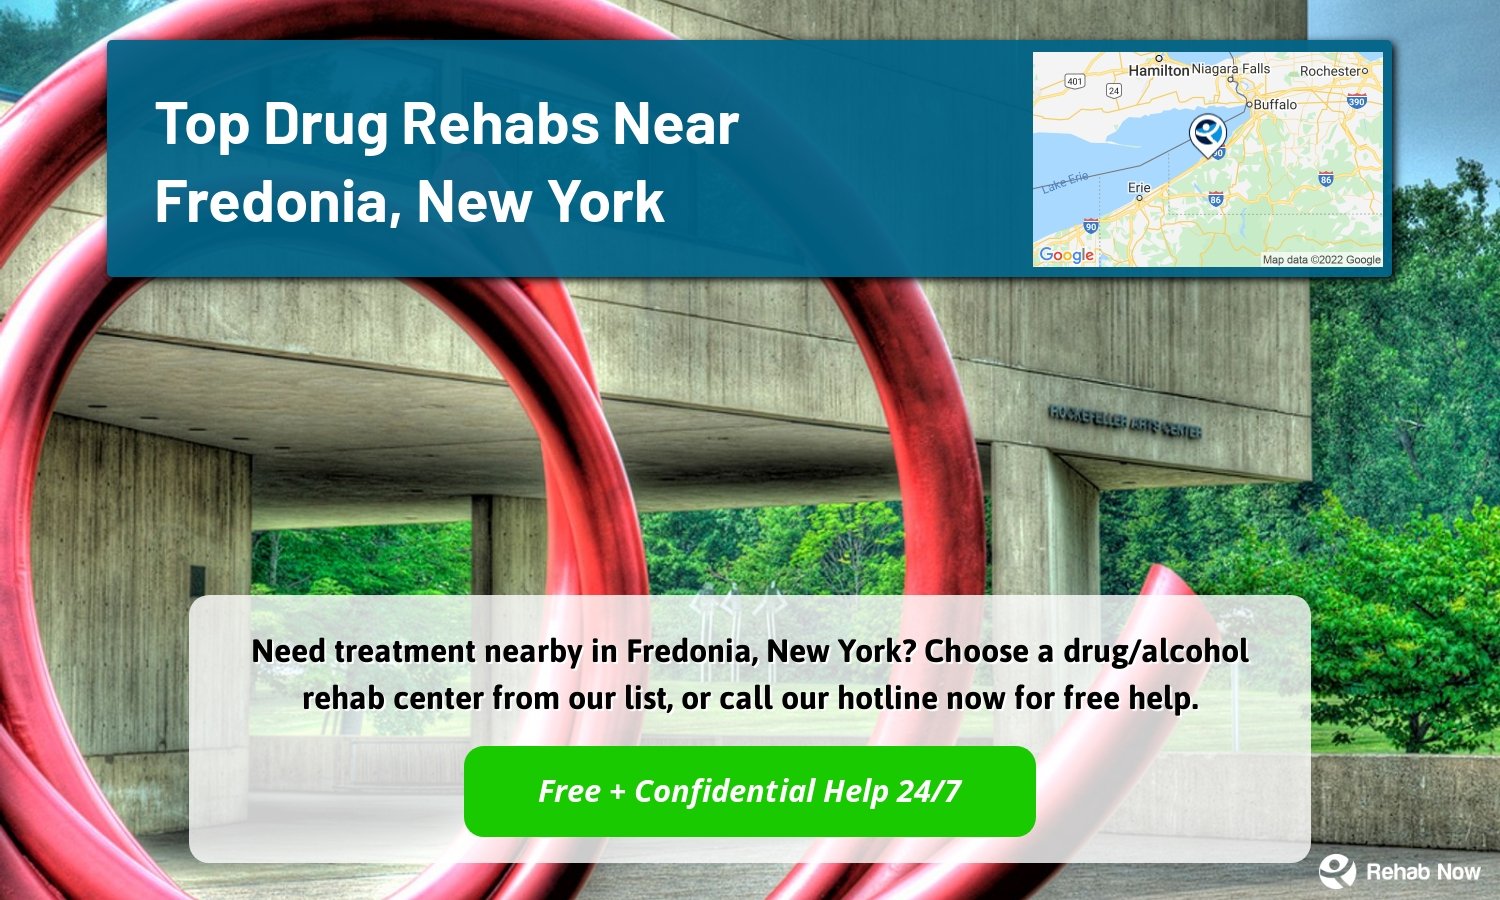 Need treatment nearby in Fredonia, New York? Choose a drug/alcohol rehab center from our list, or call our hotline now for free help.